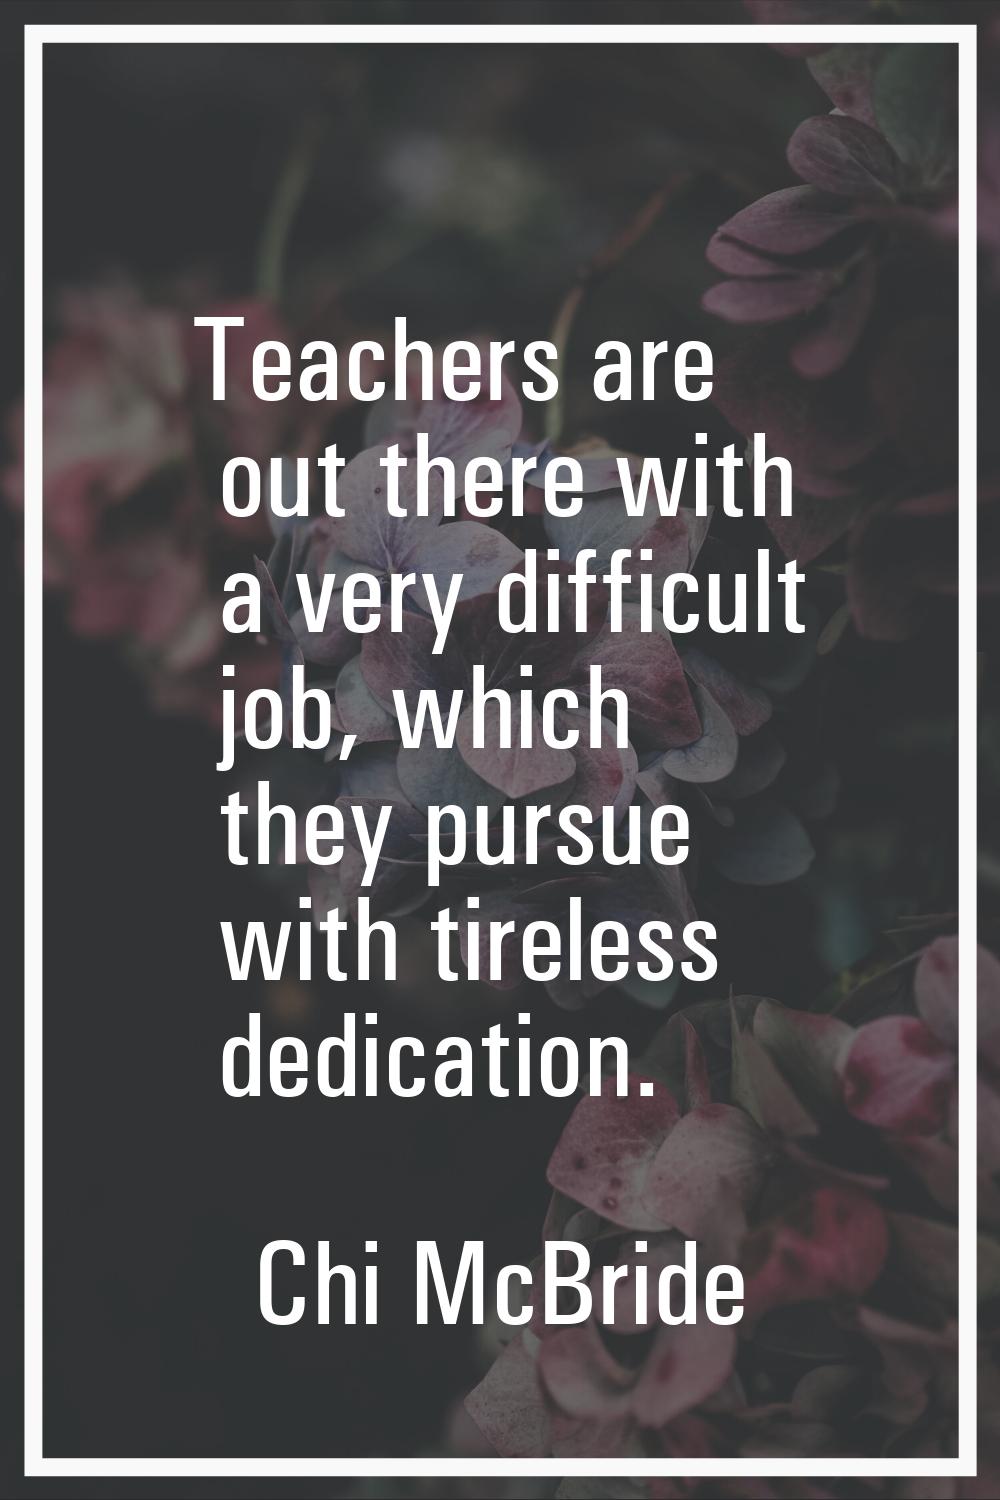 Teachers are out there with a very difficult job, which they pursue with tireless dedication.